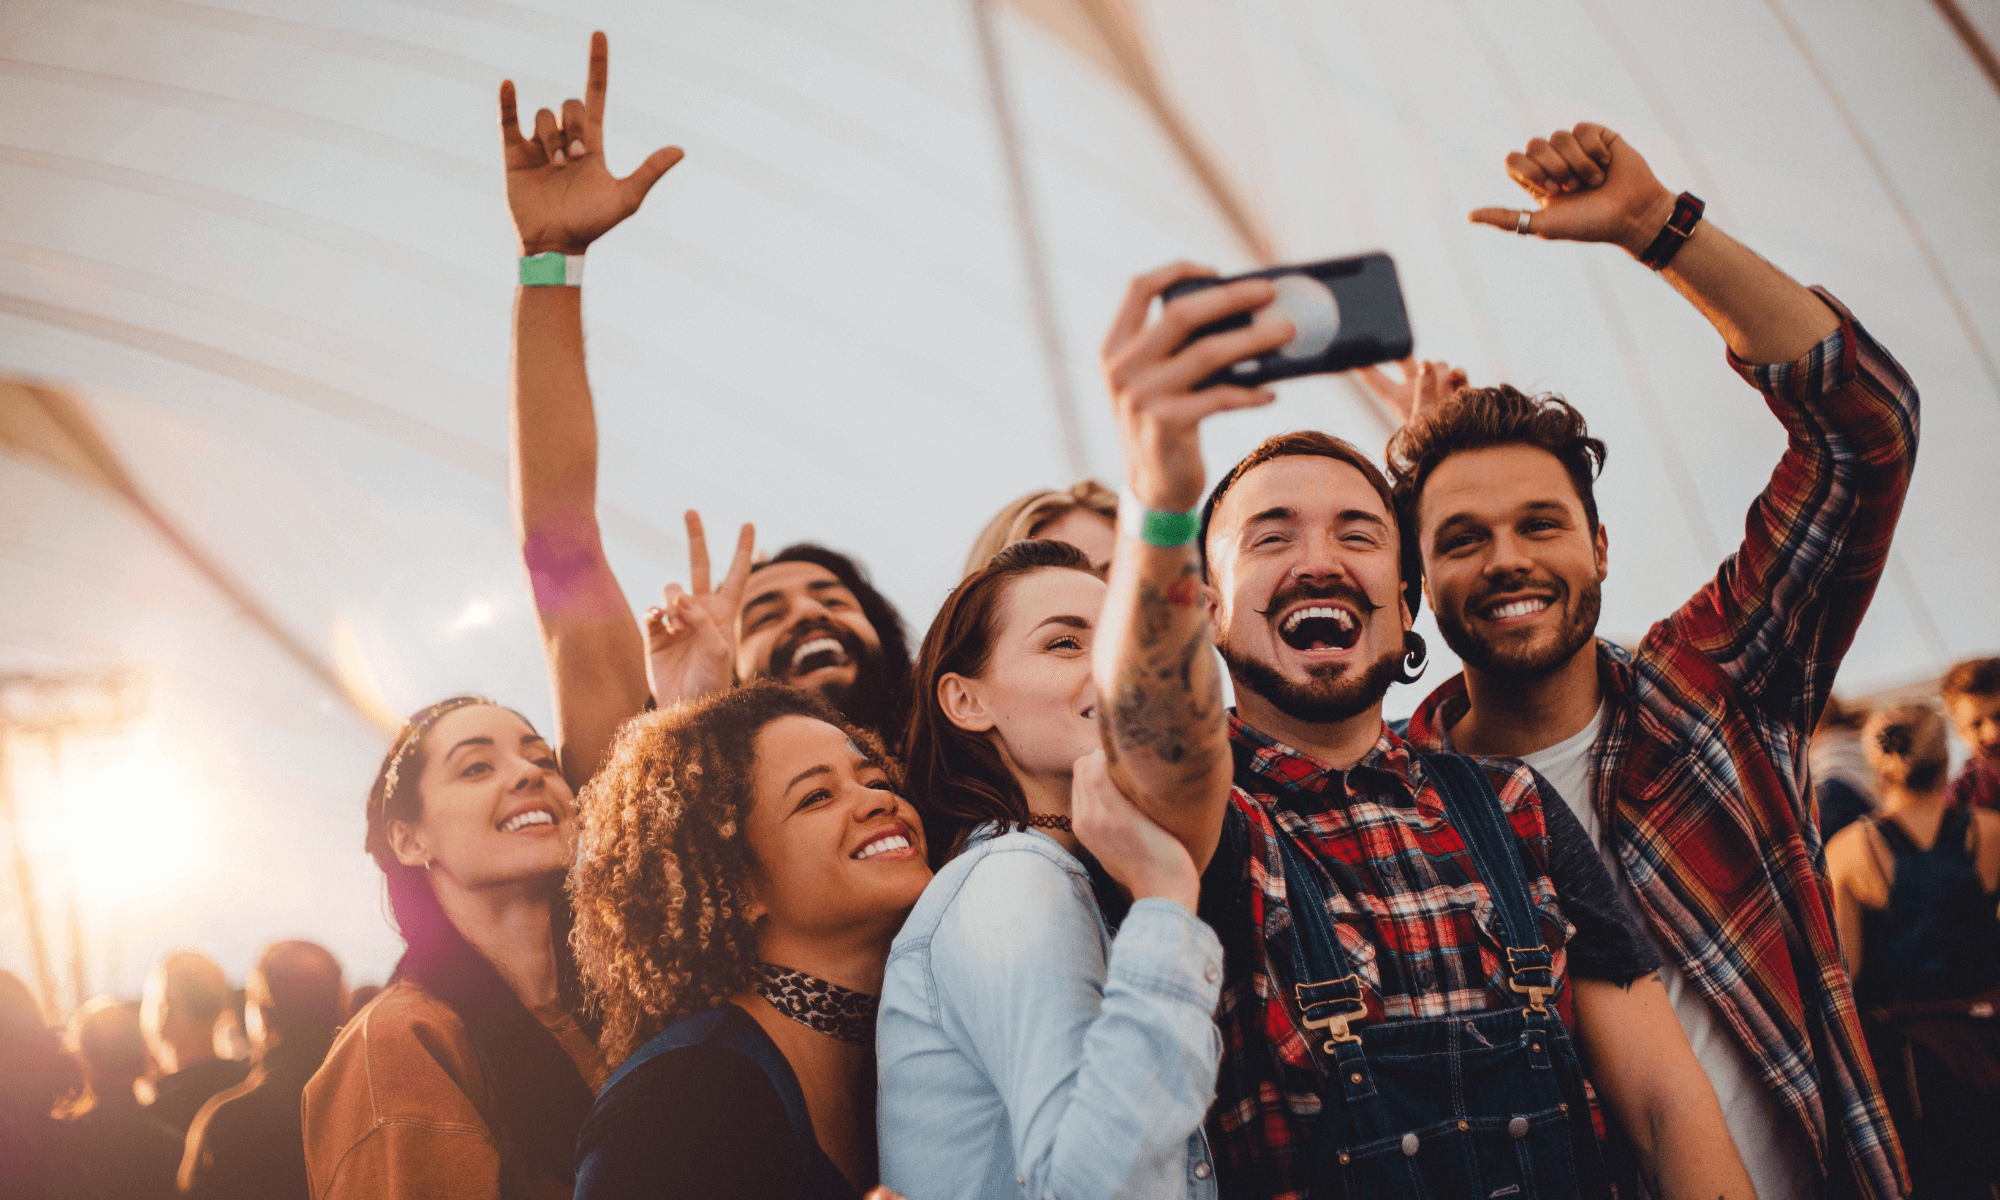 Photo illustrating social proof through User Generated Content (UGC). In the photo, a group of diverse friends (multi-cultural, young millennials) are taking a selfie while enjoying an experience together.